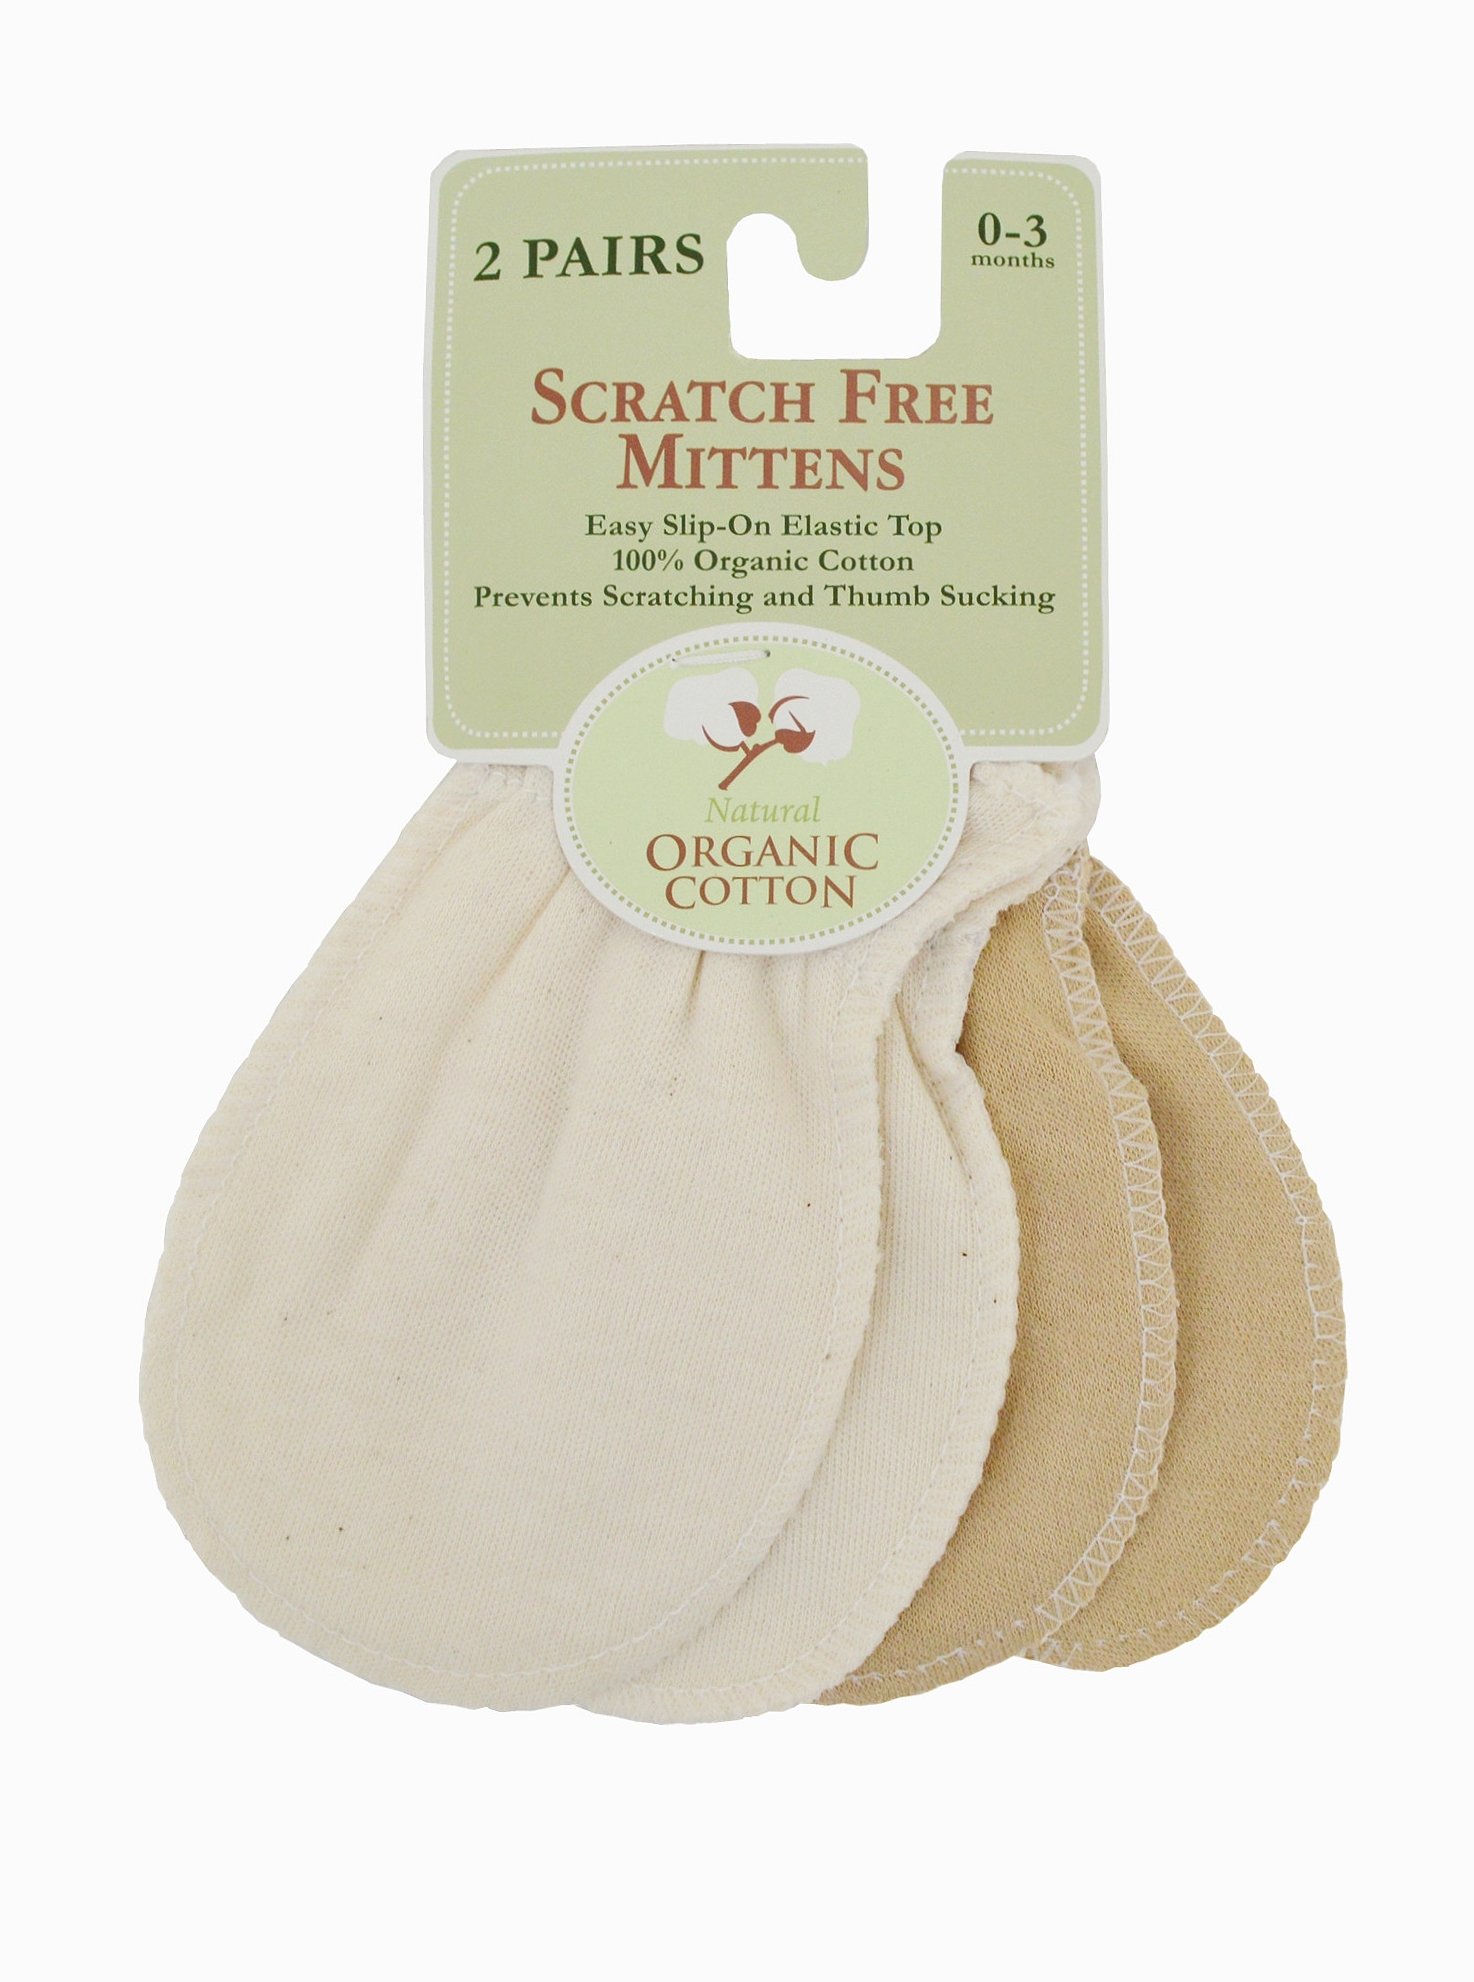 TL Care Newborn Mittens Made with Organic Cotton - 2 Pairs